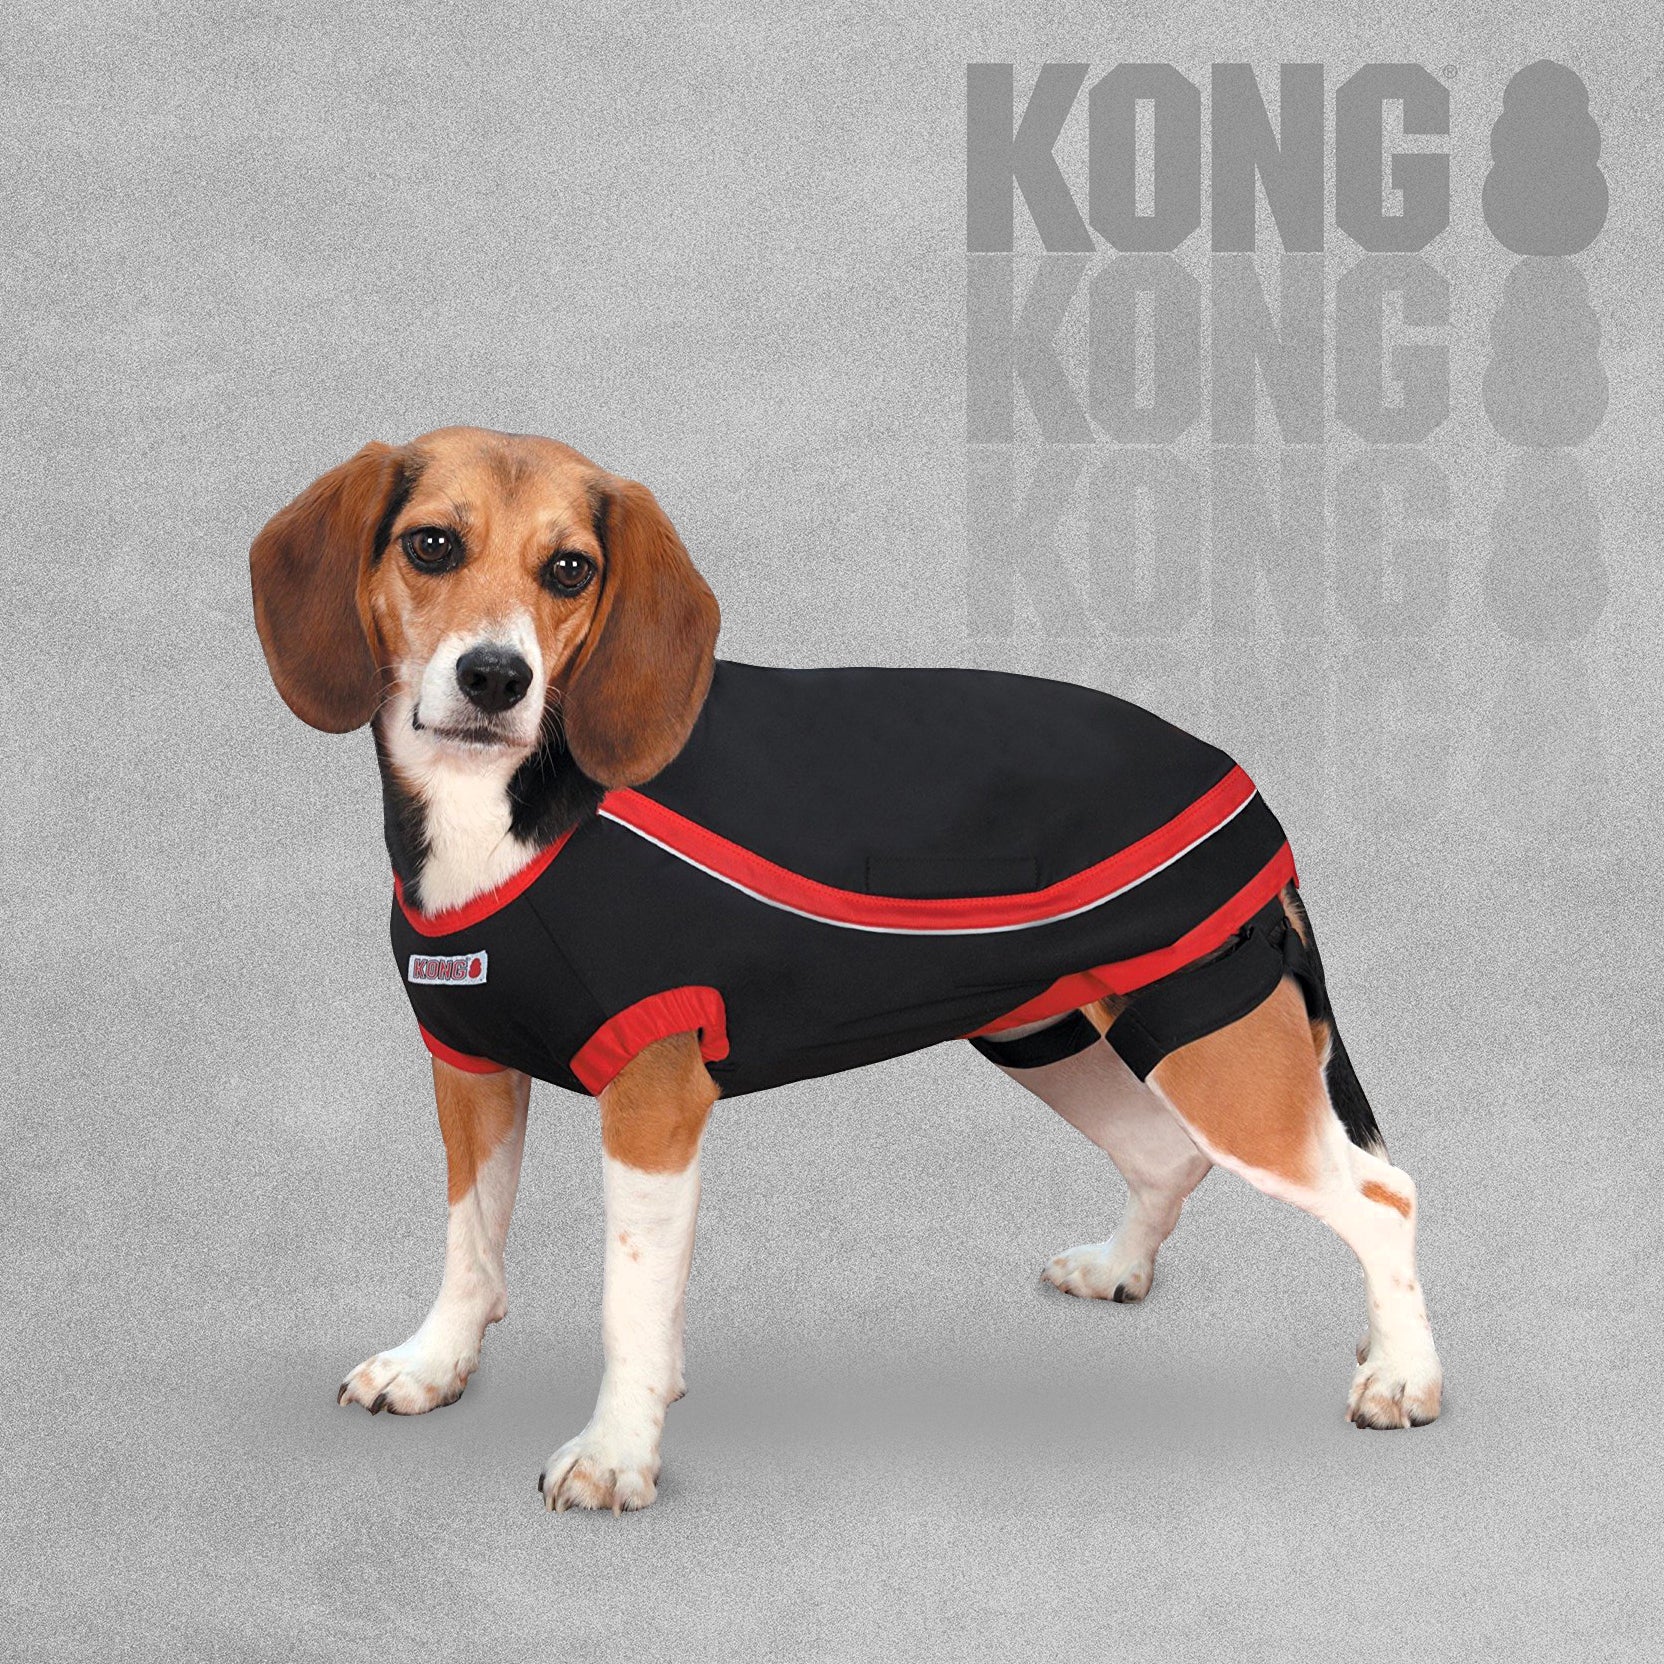 Kong Anxiety Reducing Dog Shirt For Anxious Dogs